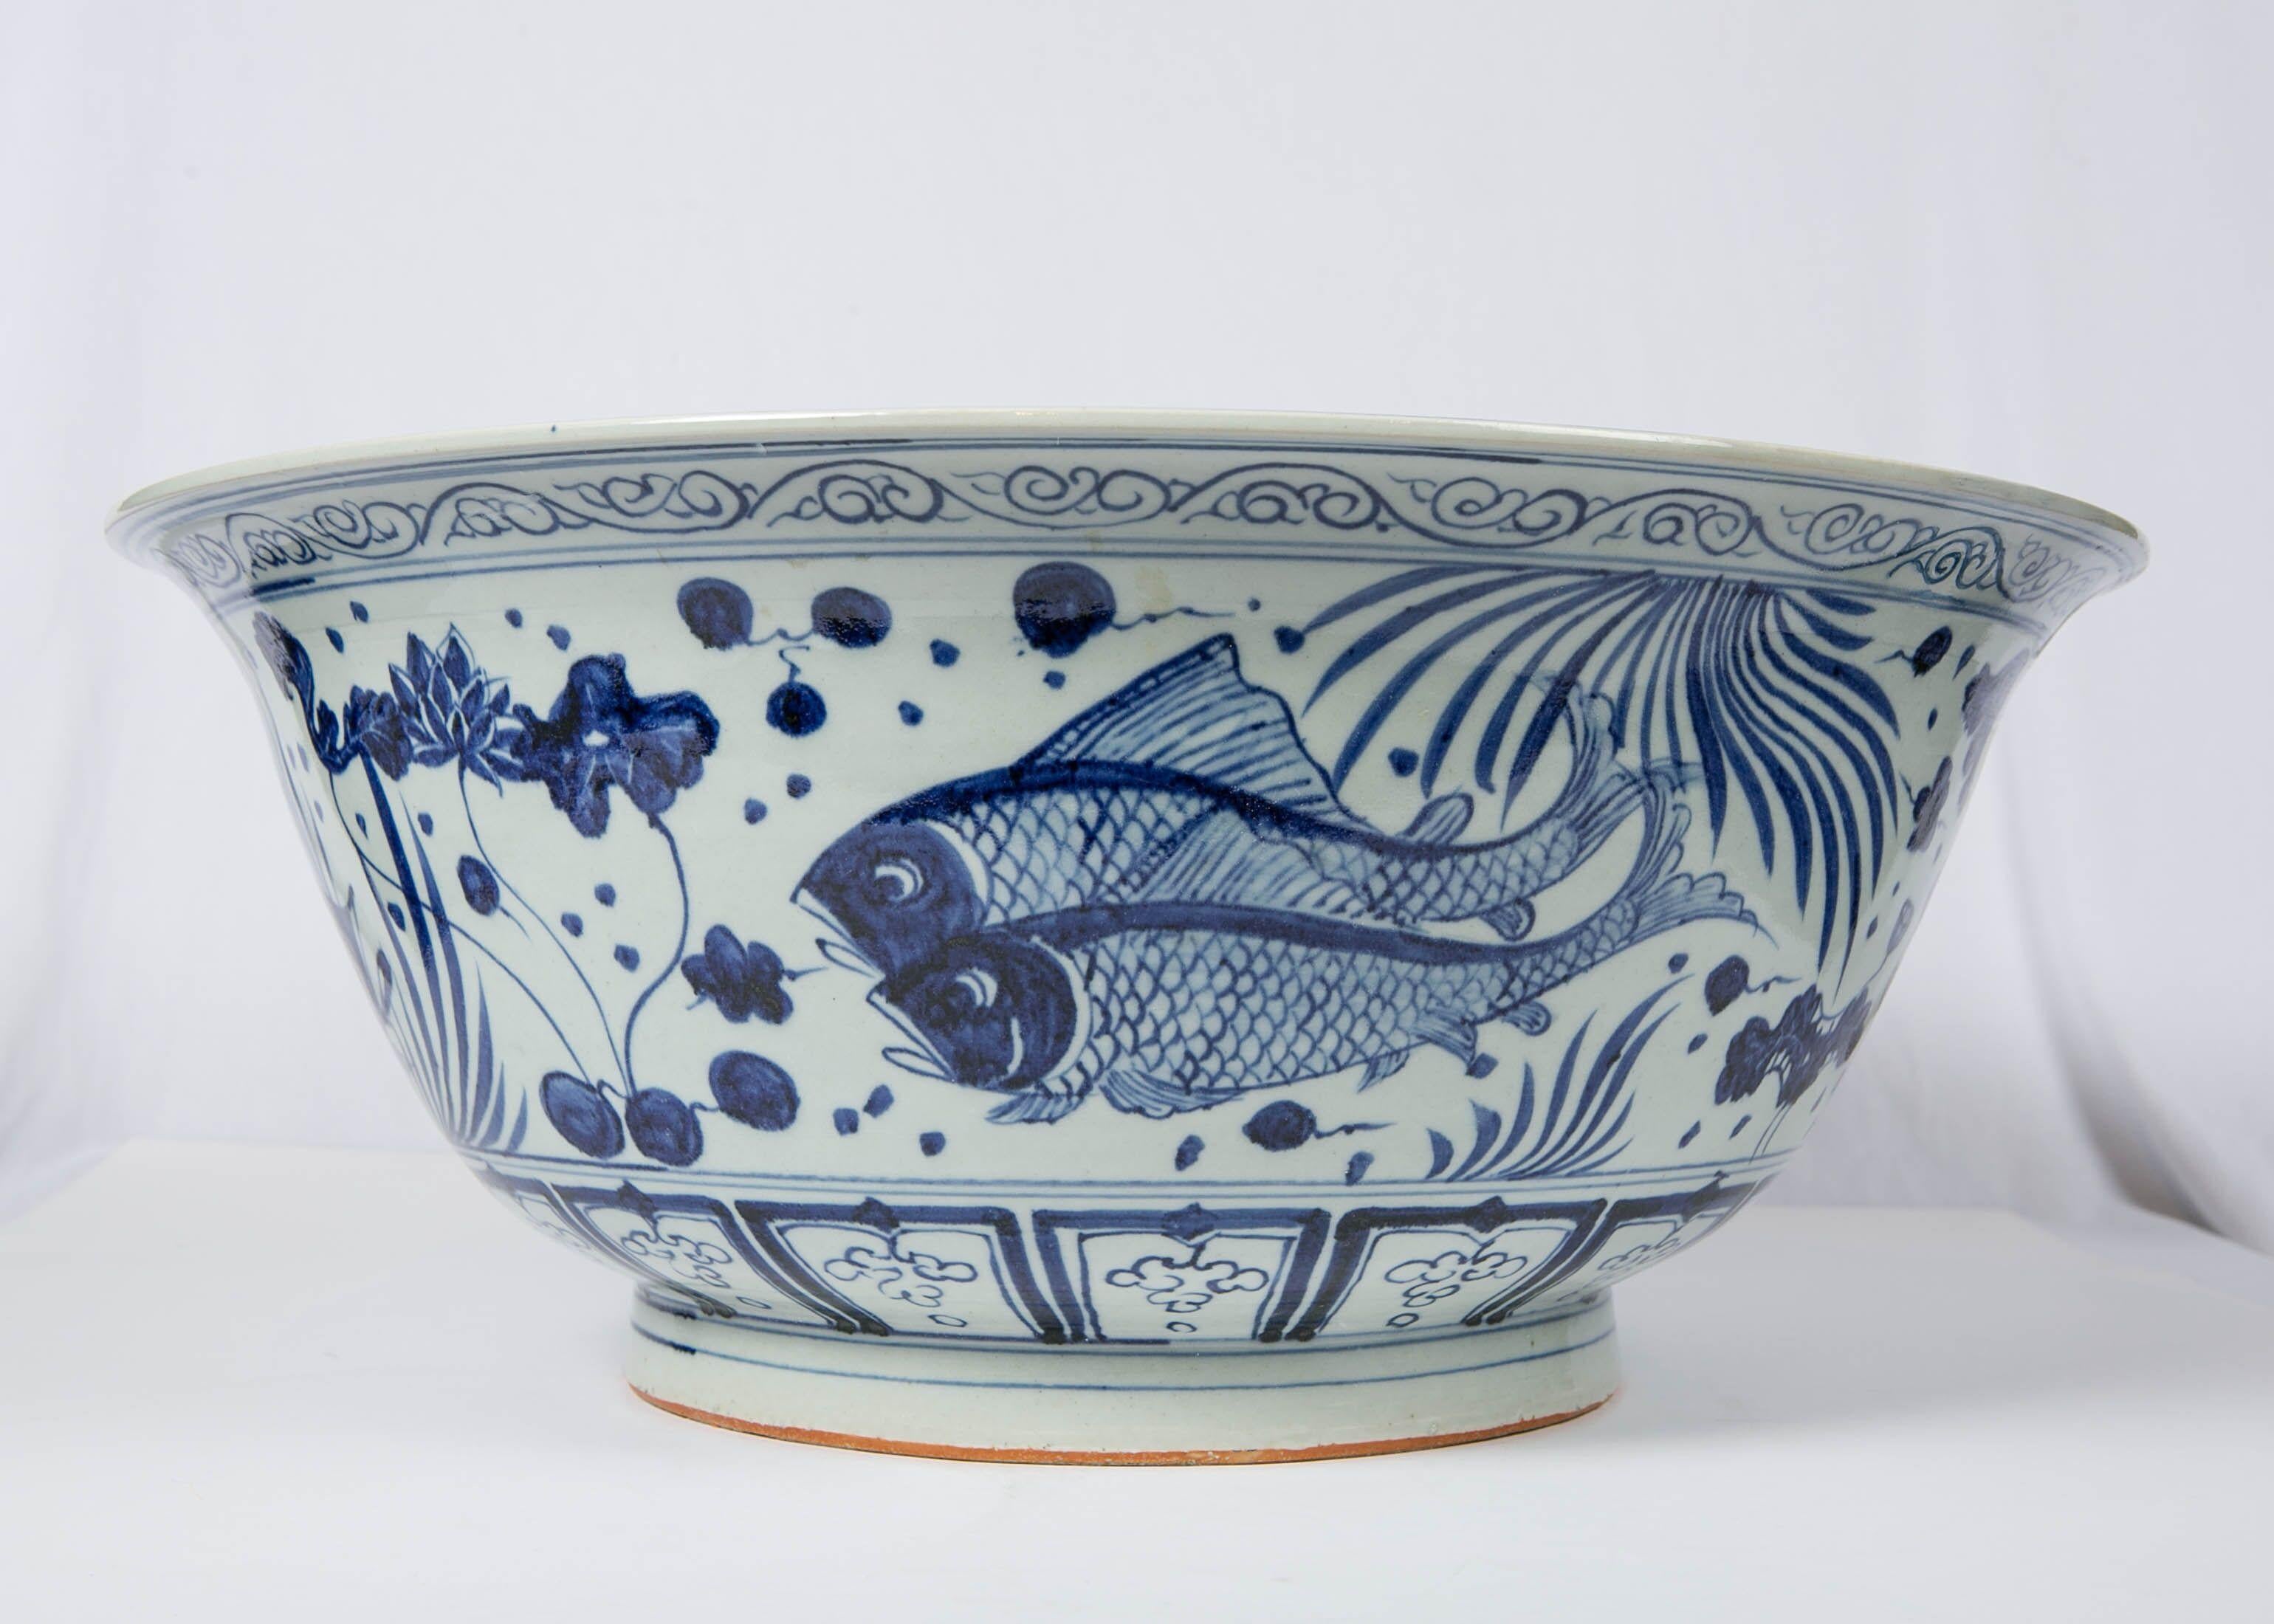 We are pleased to offer this massive hand-painted Chinese blue and white punch bowl with decoration based on the popular fish-and-aquatic plants motif. This motif was frequently painted on blue and white porcelain beginning in the Yuan-era